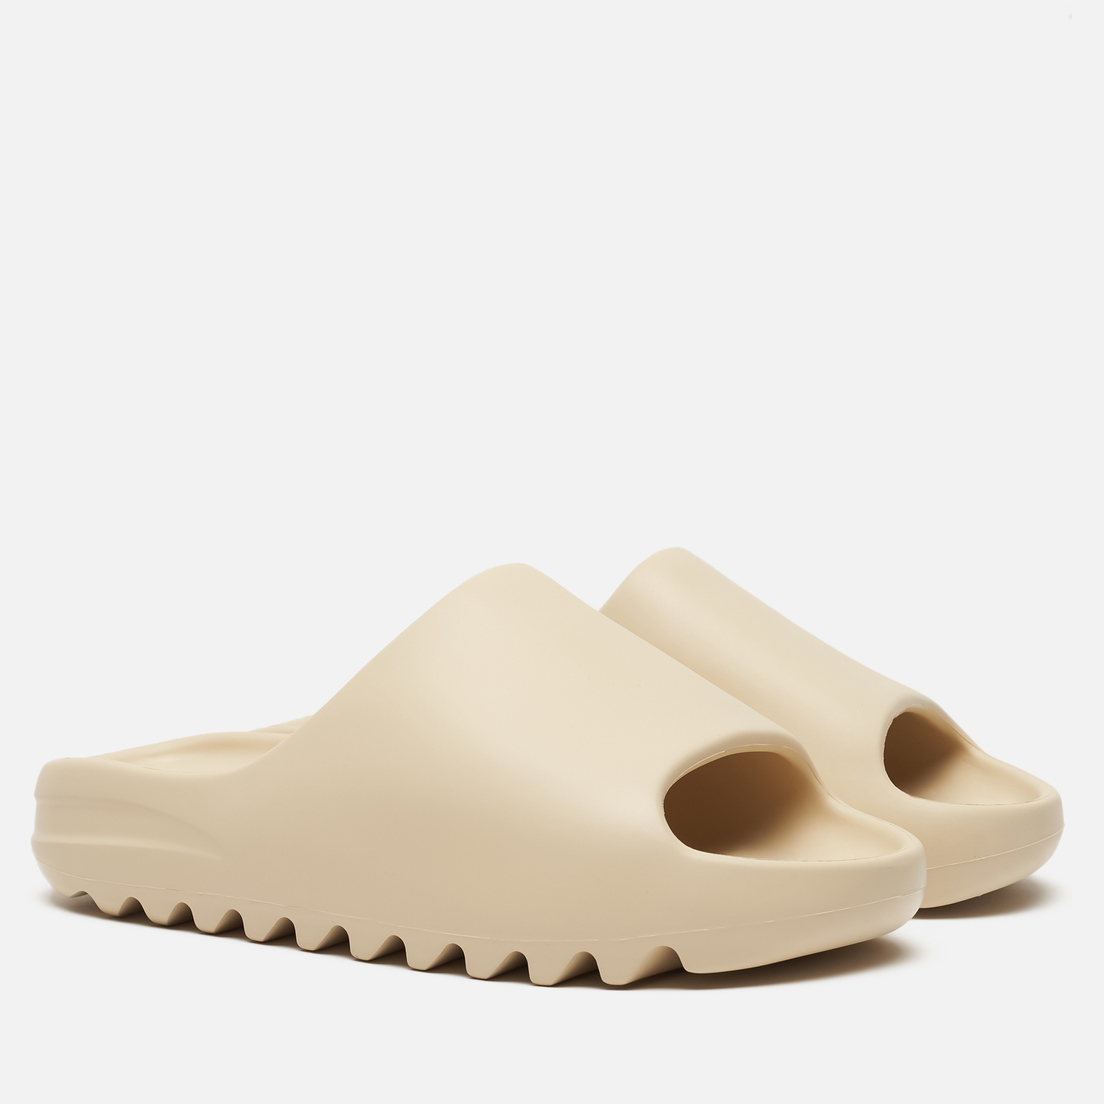 Snooze sg on instagram adidas yeezy slides concept